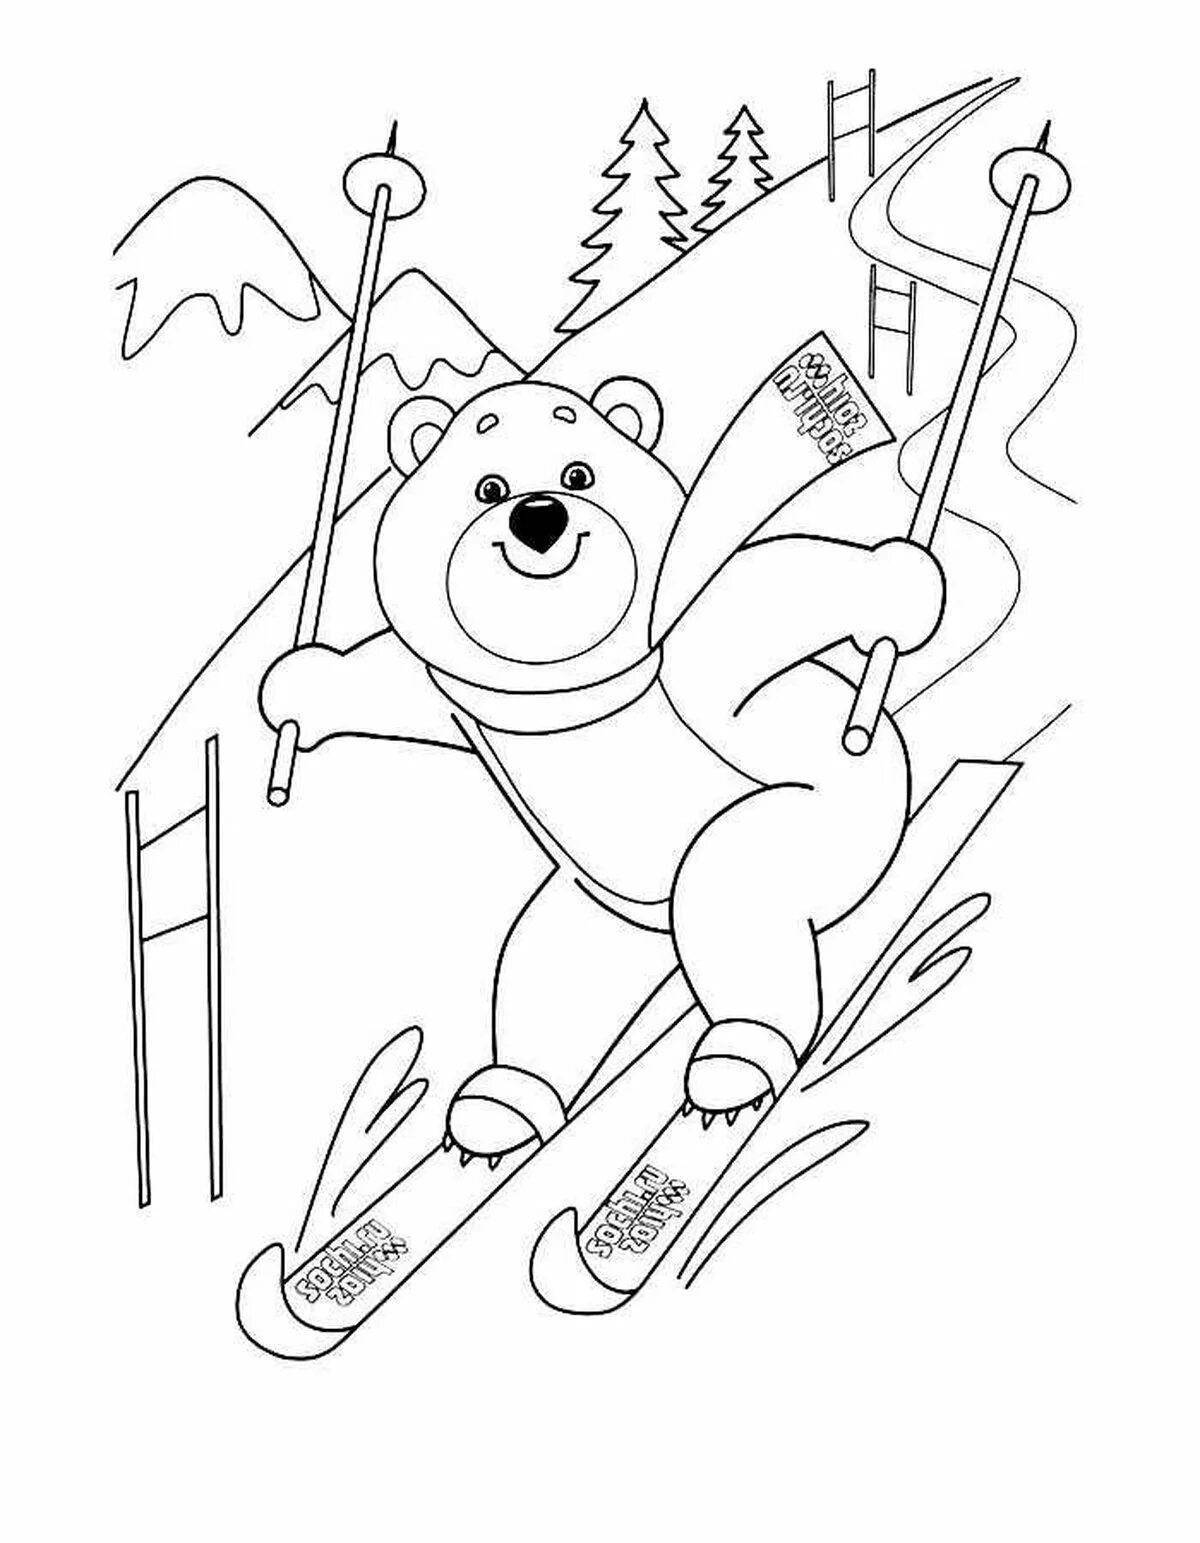 Coloured winter olympiad coloring book